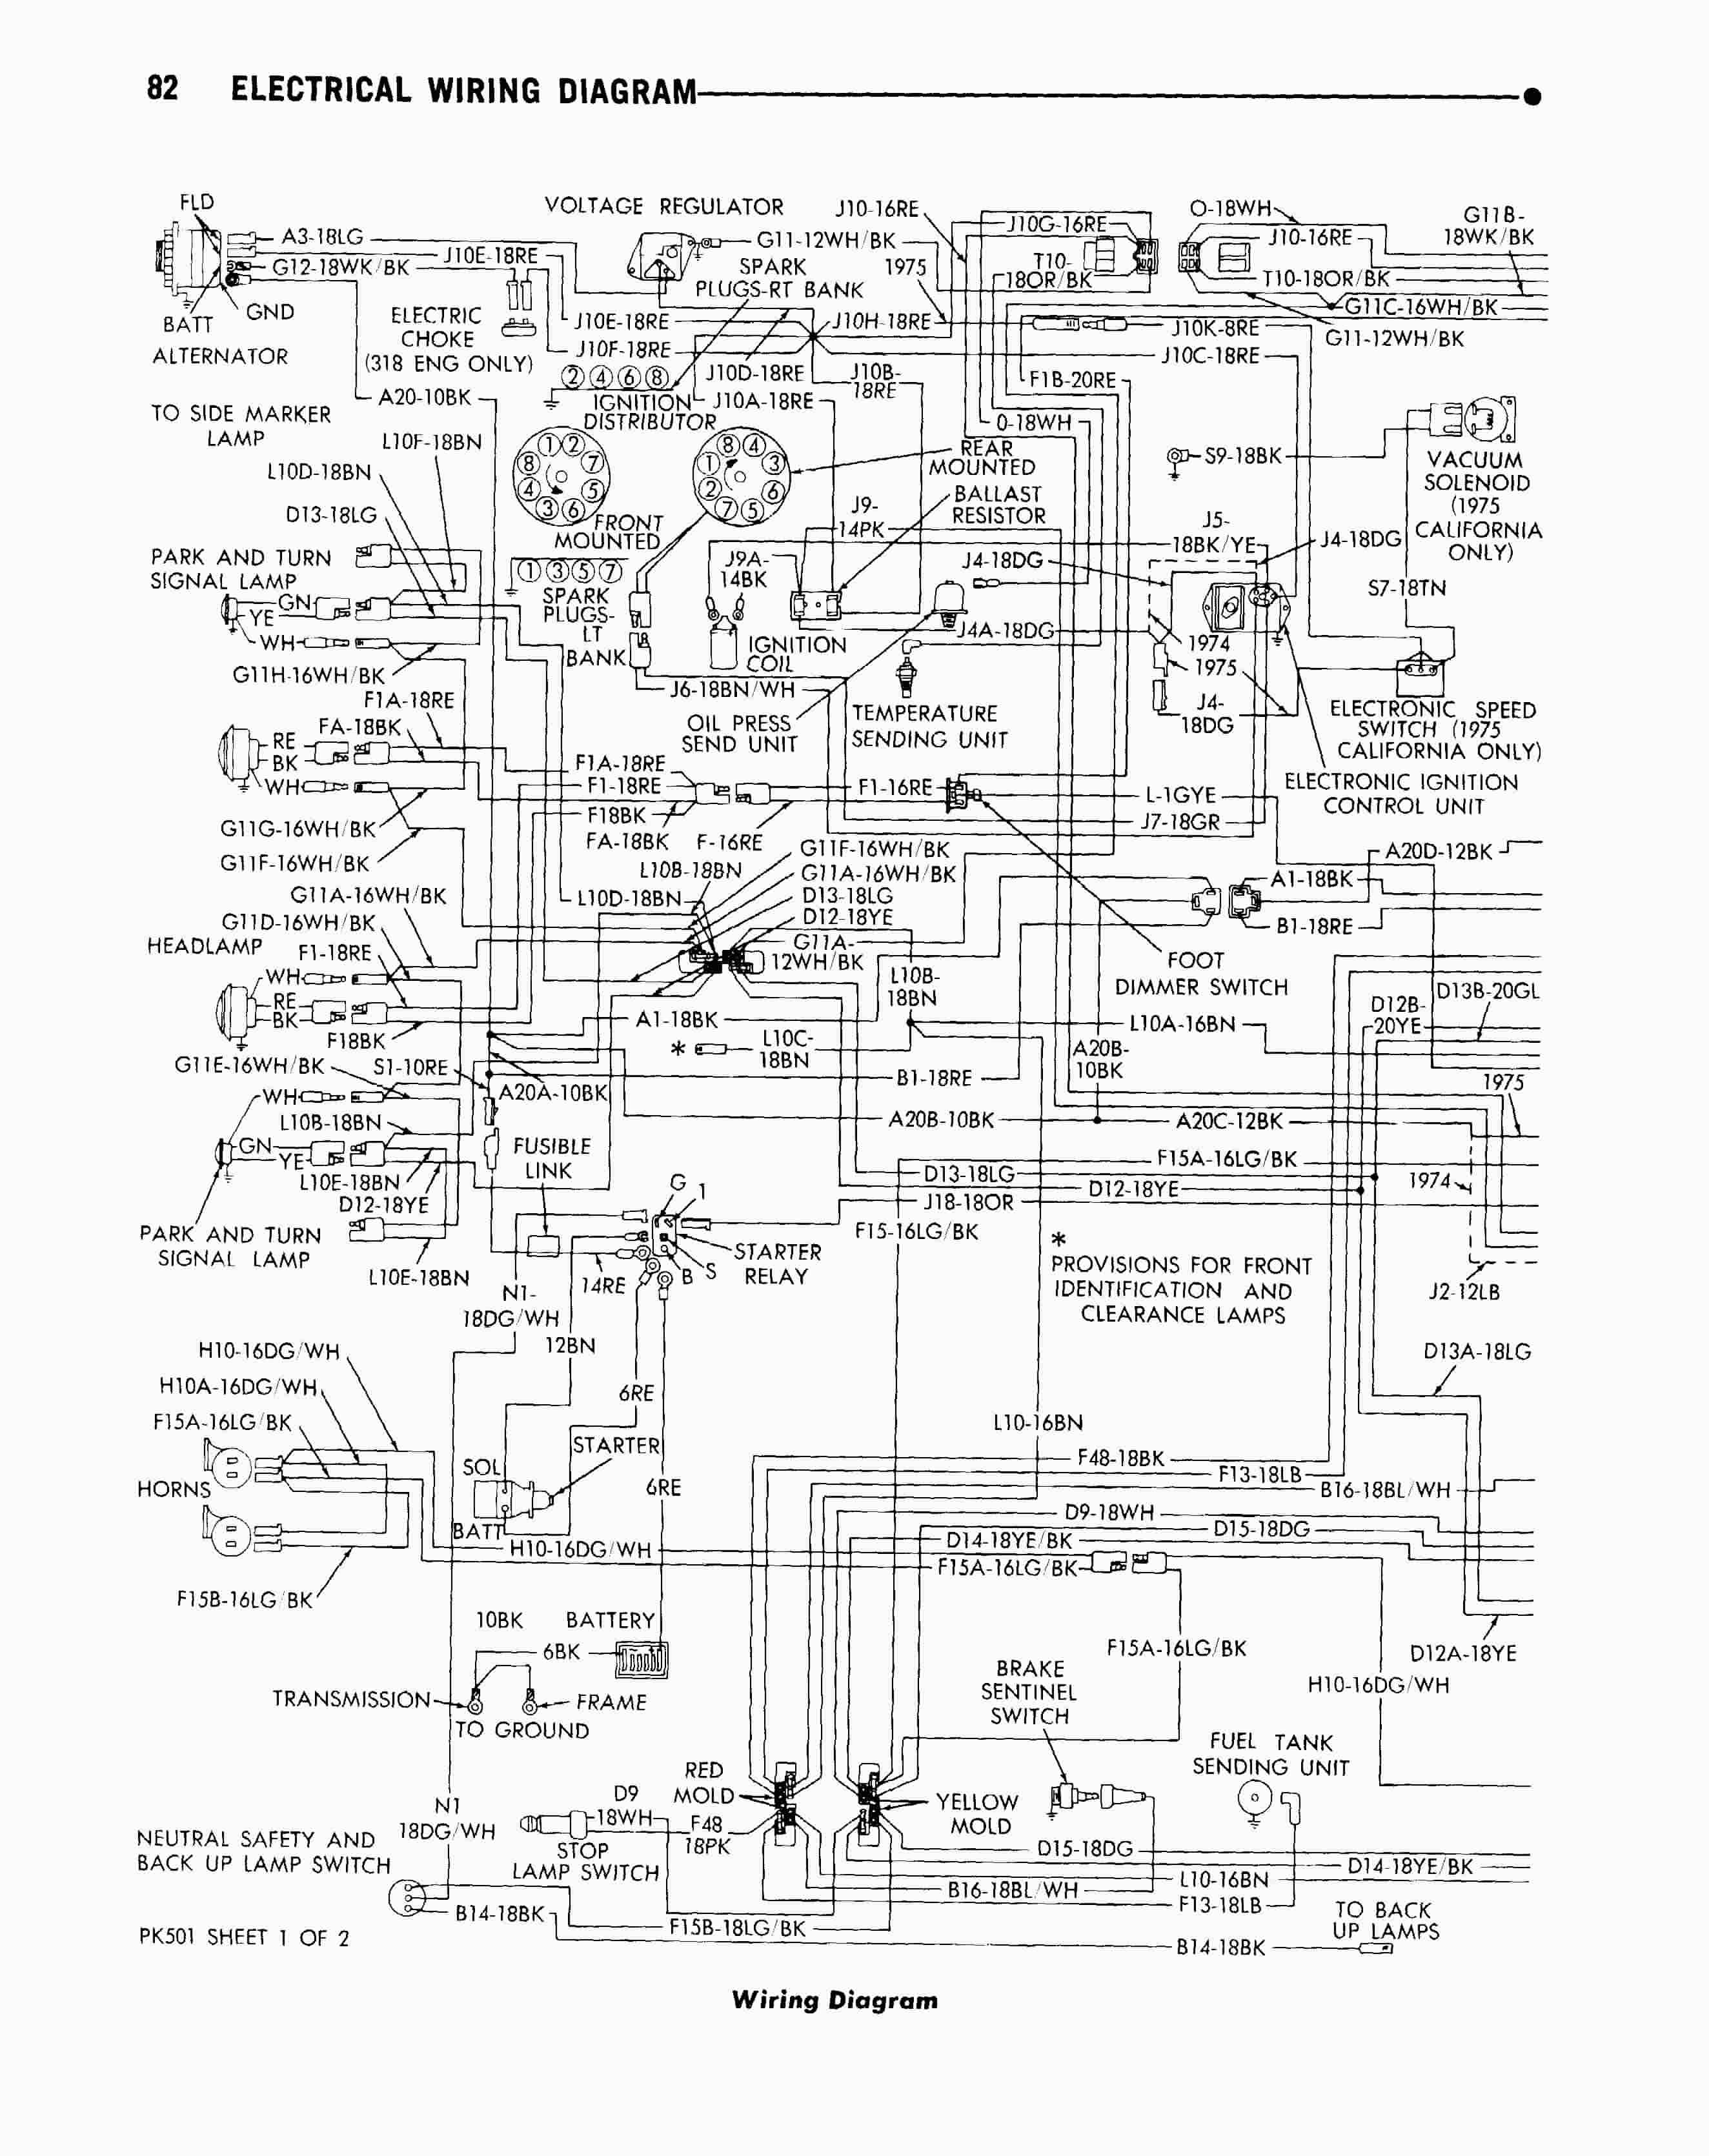 Dave's Place - 74-75 Dodge Class A Chassis Wiring Diagram  78 Dodge Delta Motorhome Wiring Diagram    Daves Place